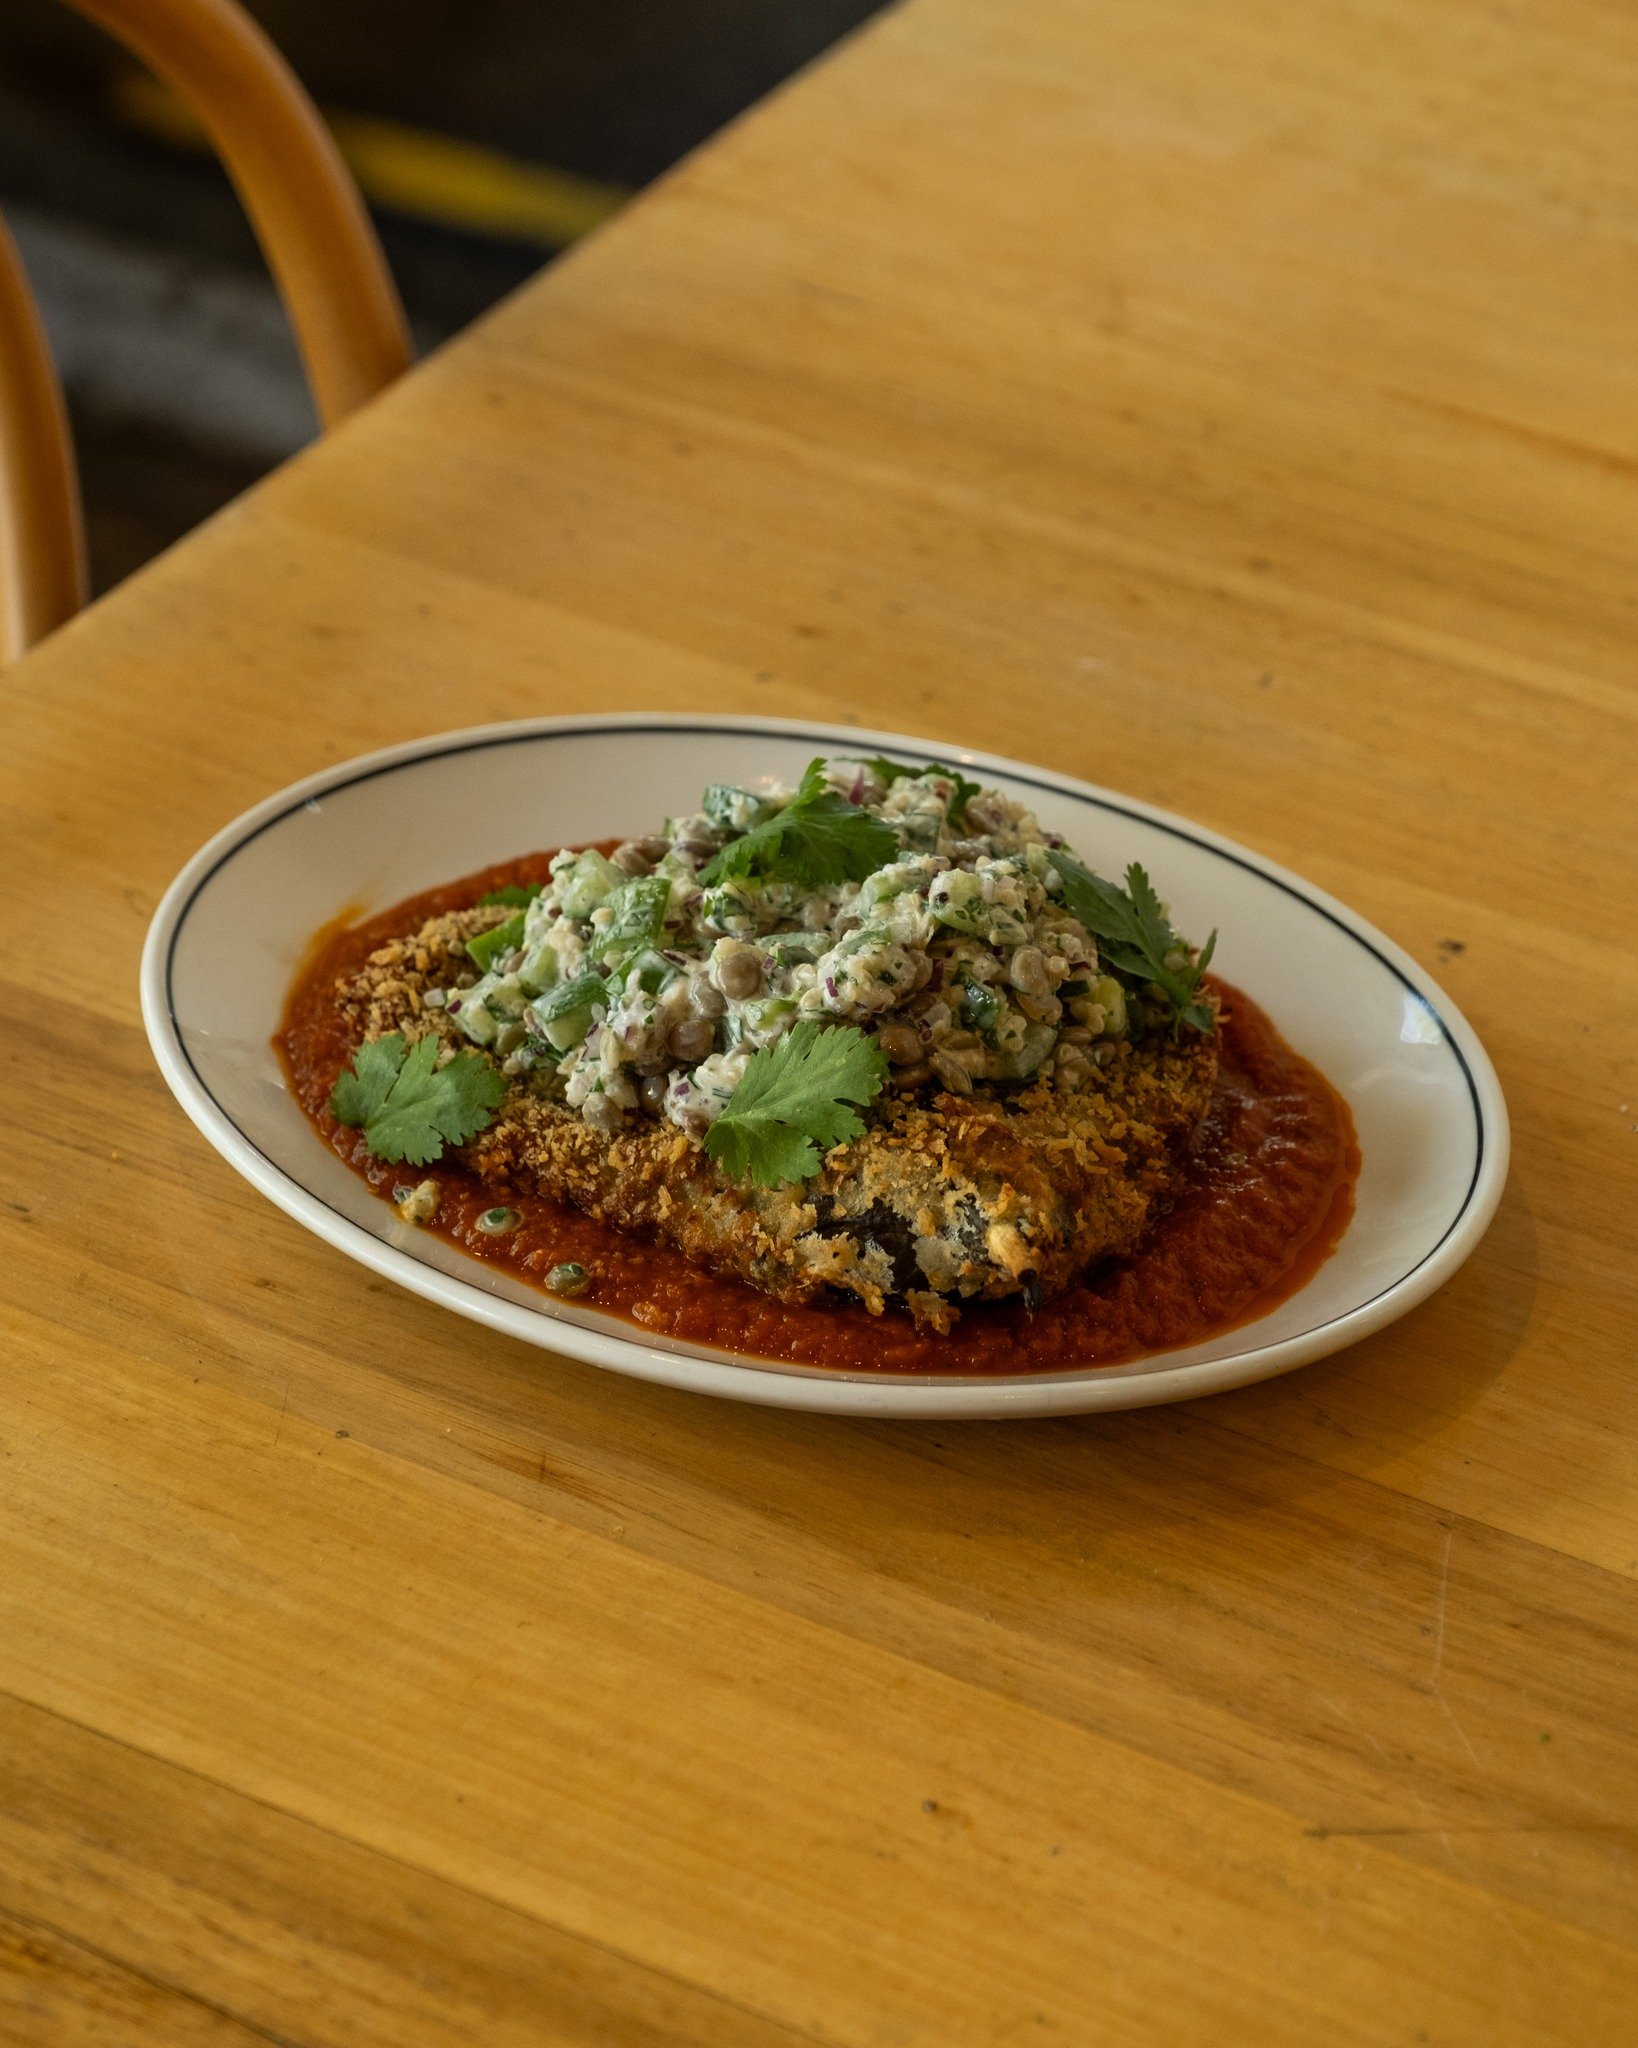 The dish is a delightful blend of flavors: cardamom-spiced crumbed eggplant provides warmth, while tangy tomato passata and hearty lentil quinoa salad add depth. A zesty lemon tahini dressing ties it all together.